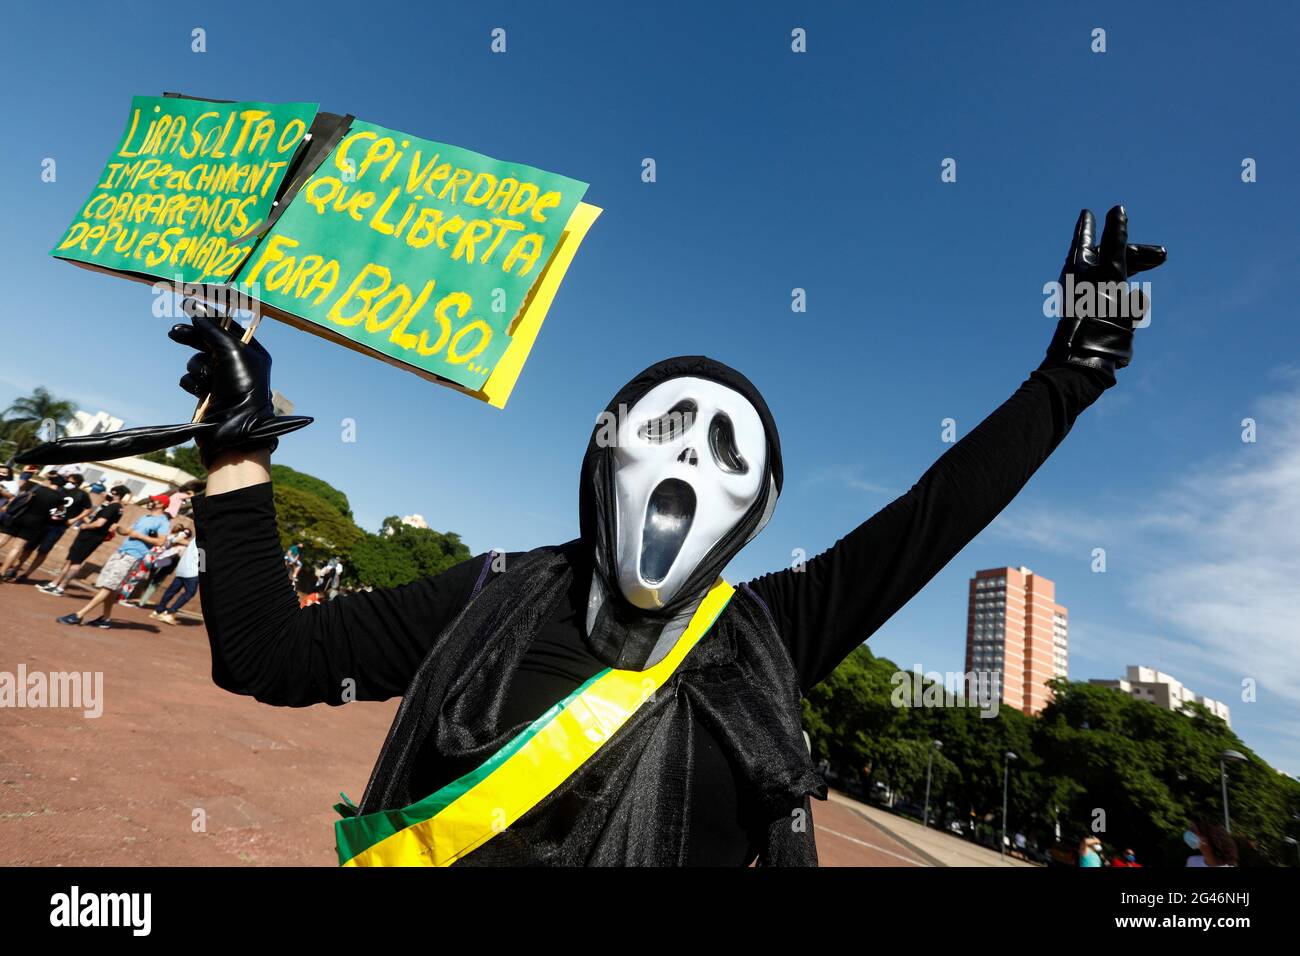 A demonstrator holds a placard reading 'Lira releases the impeachment. We will charge deputies and senators. CPI true that awakens. Out Bolso...' during a protest against Brazil's President Jair Bolsonaro's handling of the coronavirus disease (COVID-19) pandemic and to impeach him, in Goiania, Brazil, June 19, 2021. REUTERS/Diego Vara Stock Photo